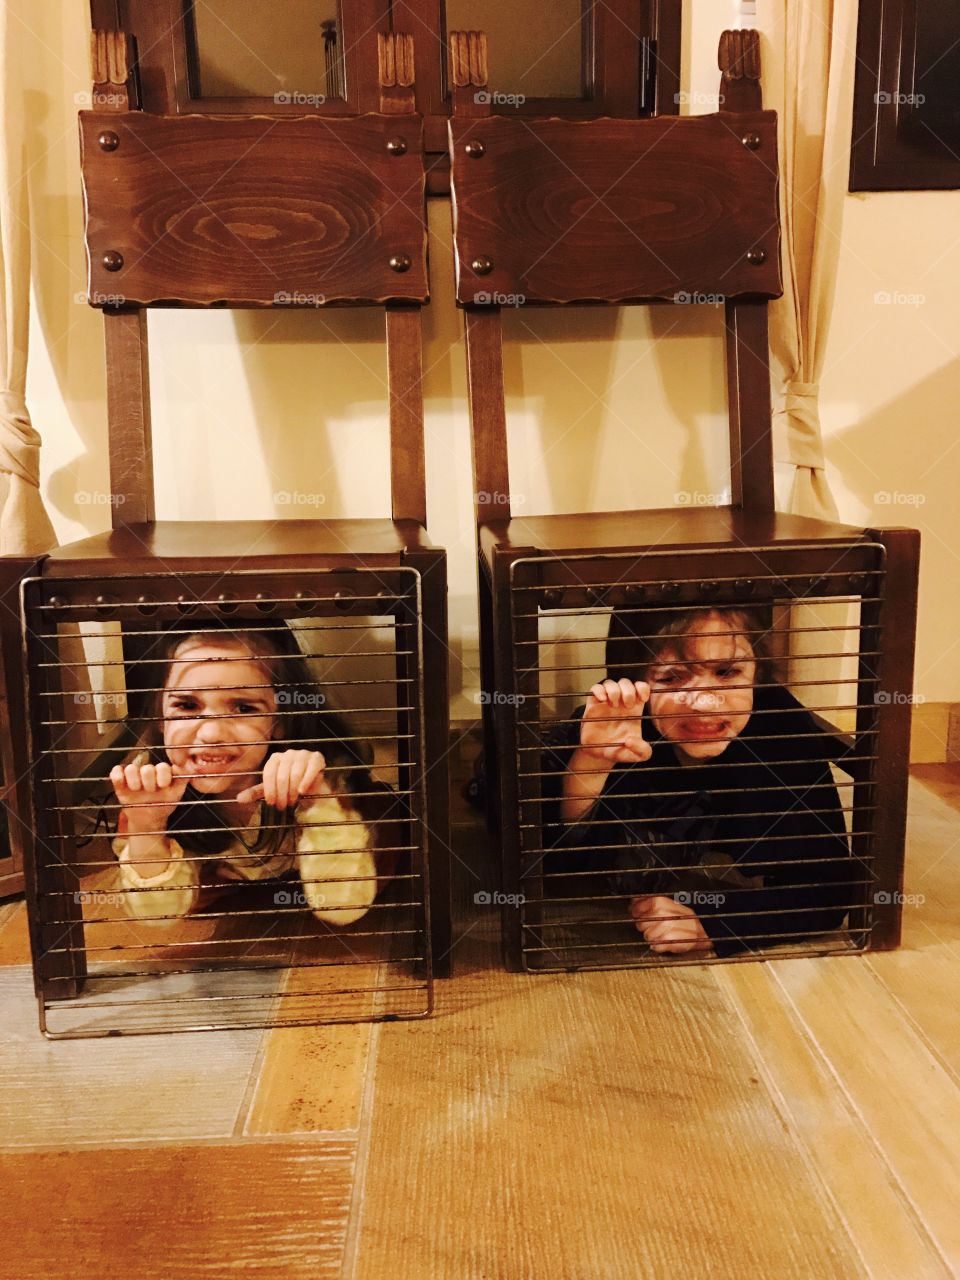 Lions in their cages